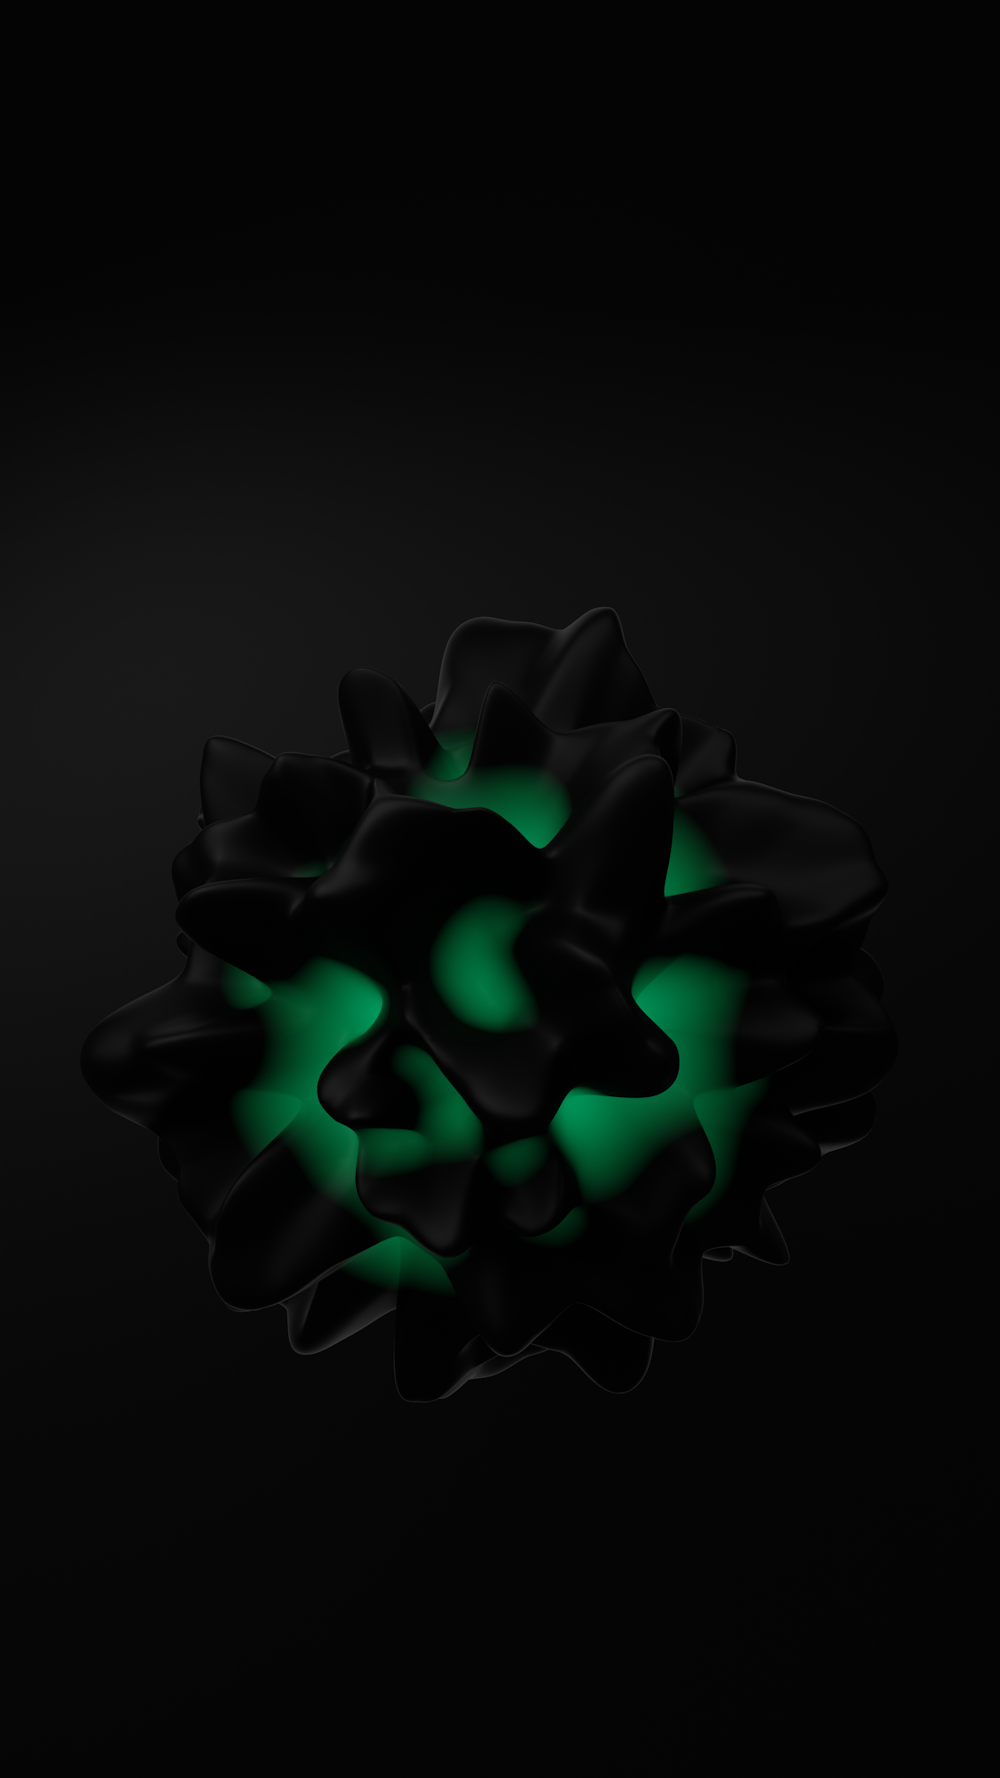 a black background with a green light in the center